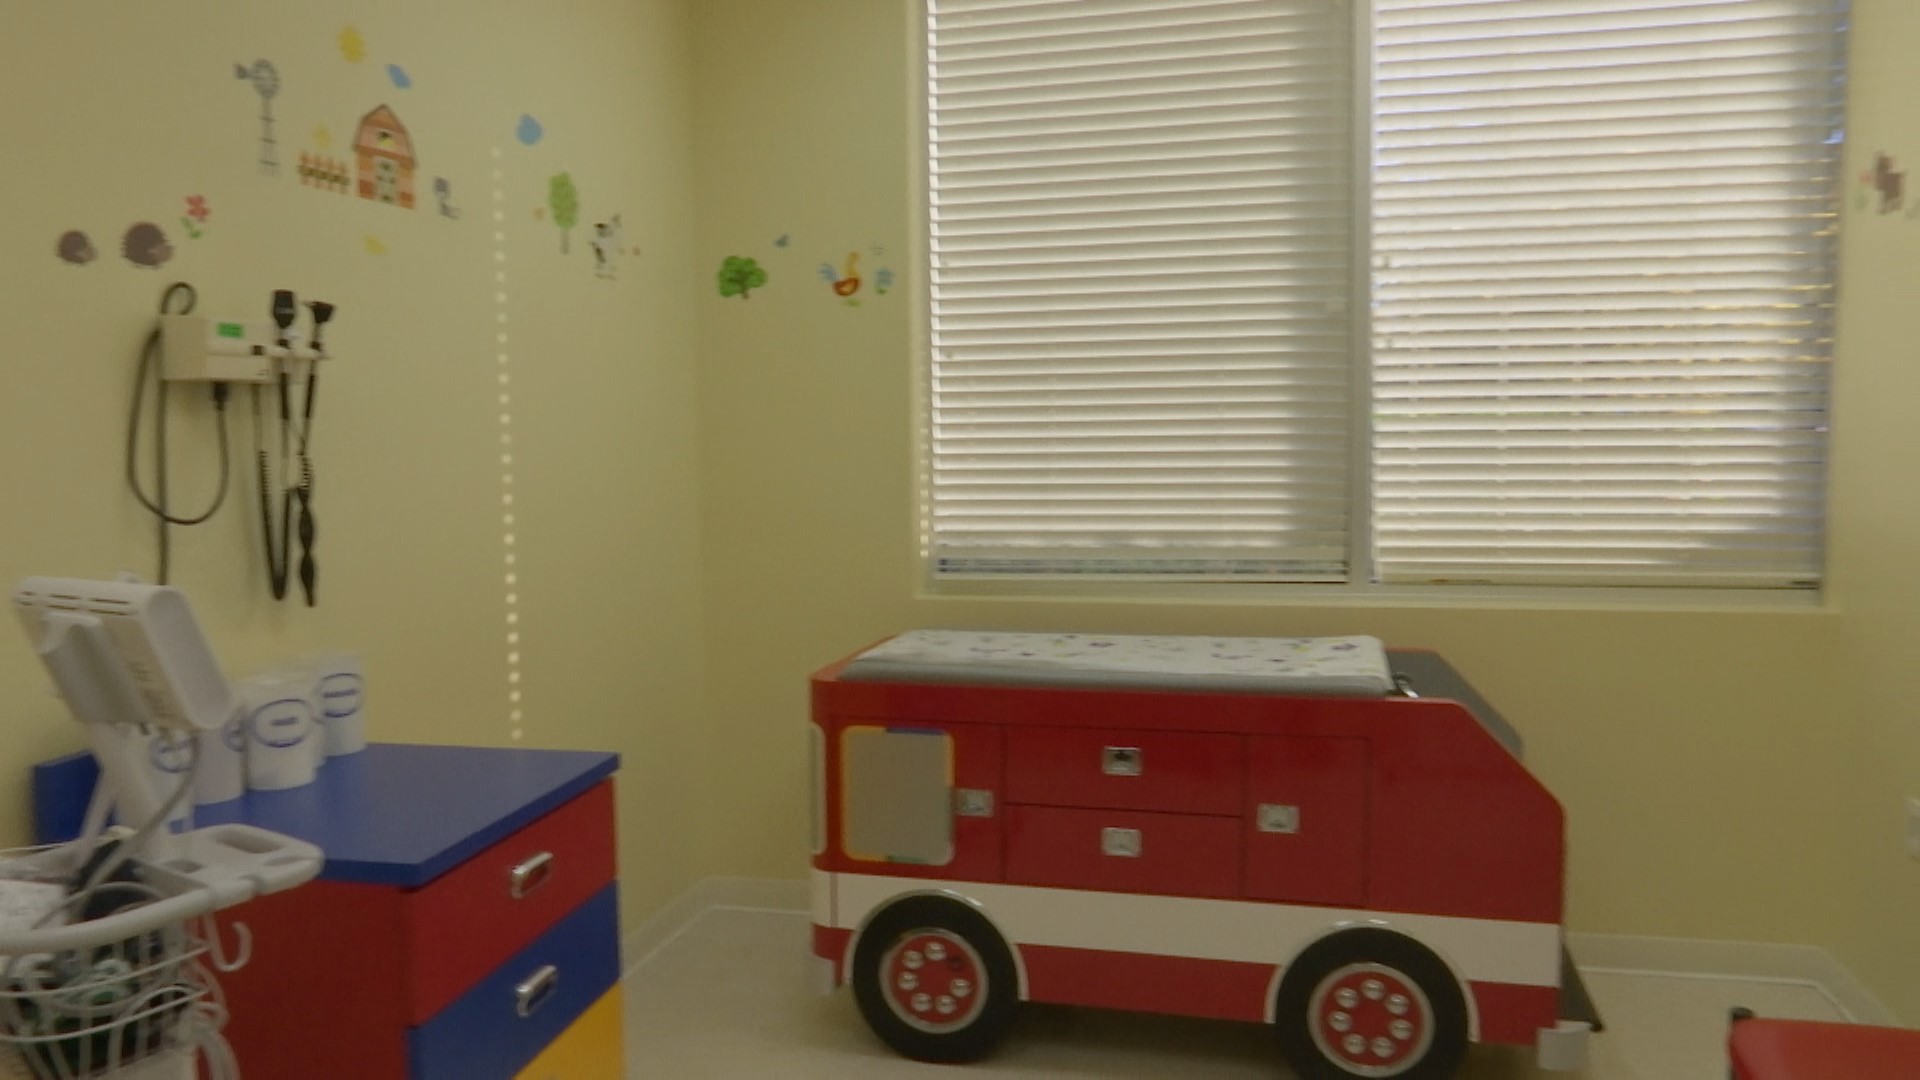 The new pediatrics clinic will service about 3,000 patients in North Alabama.